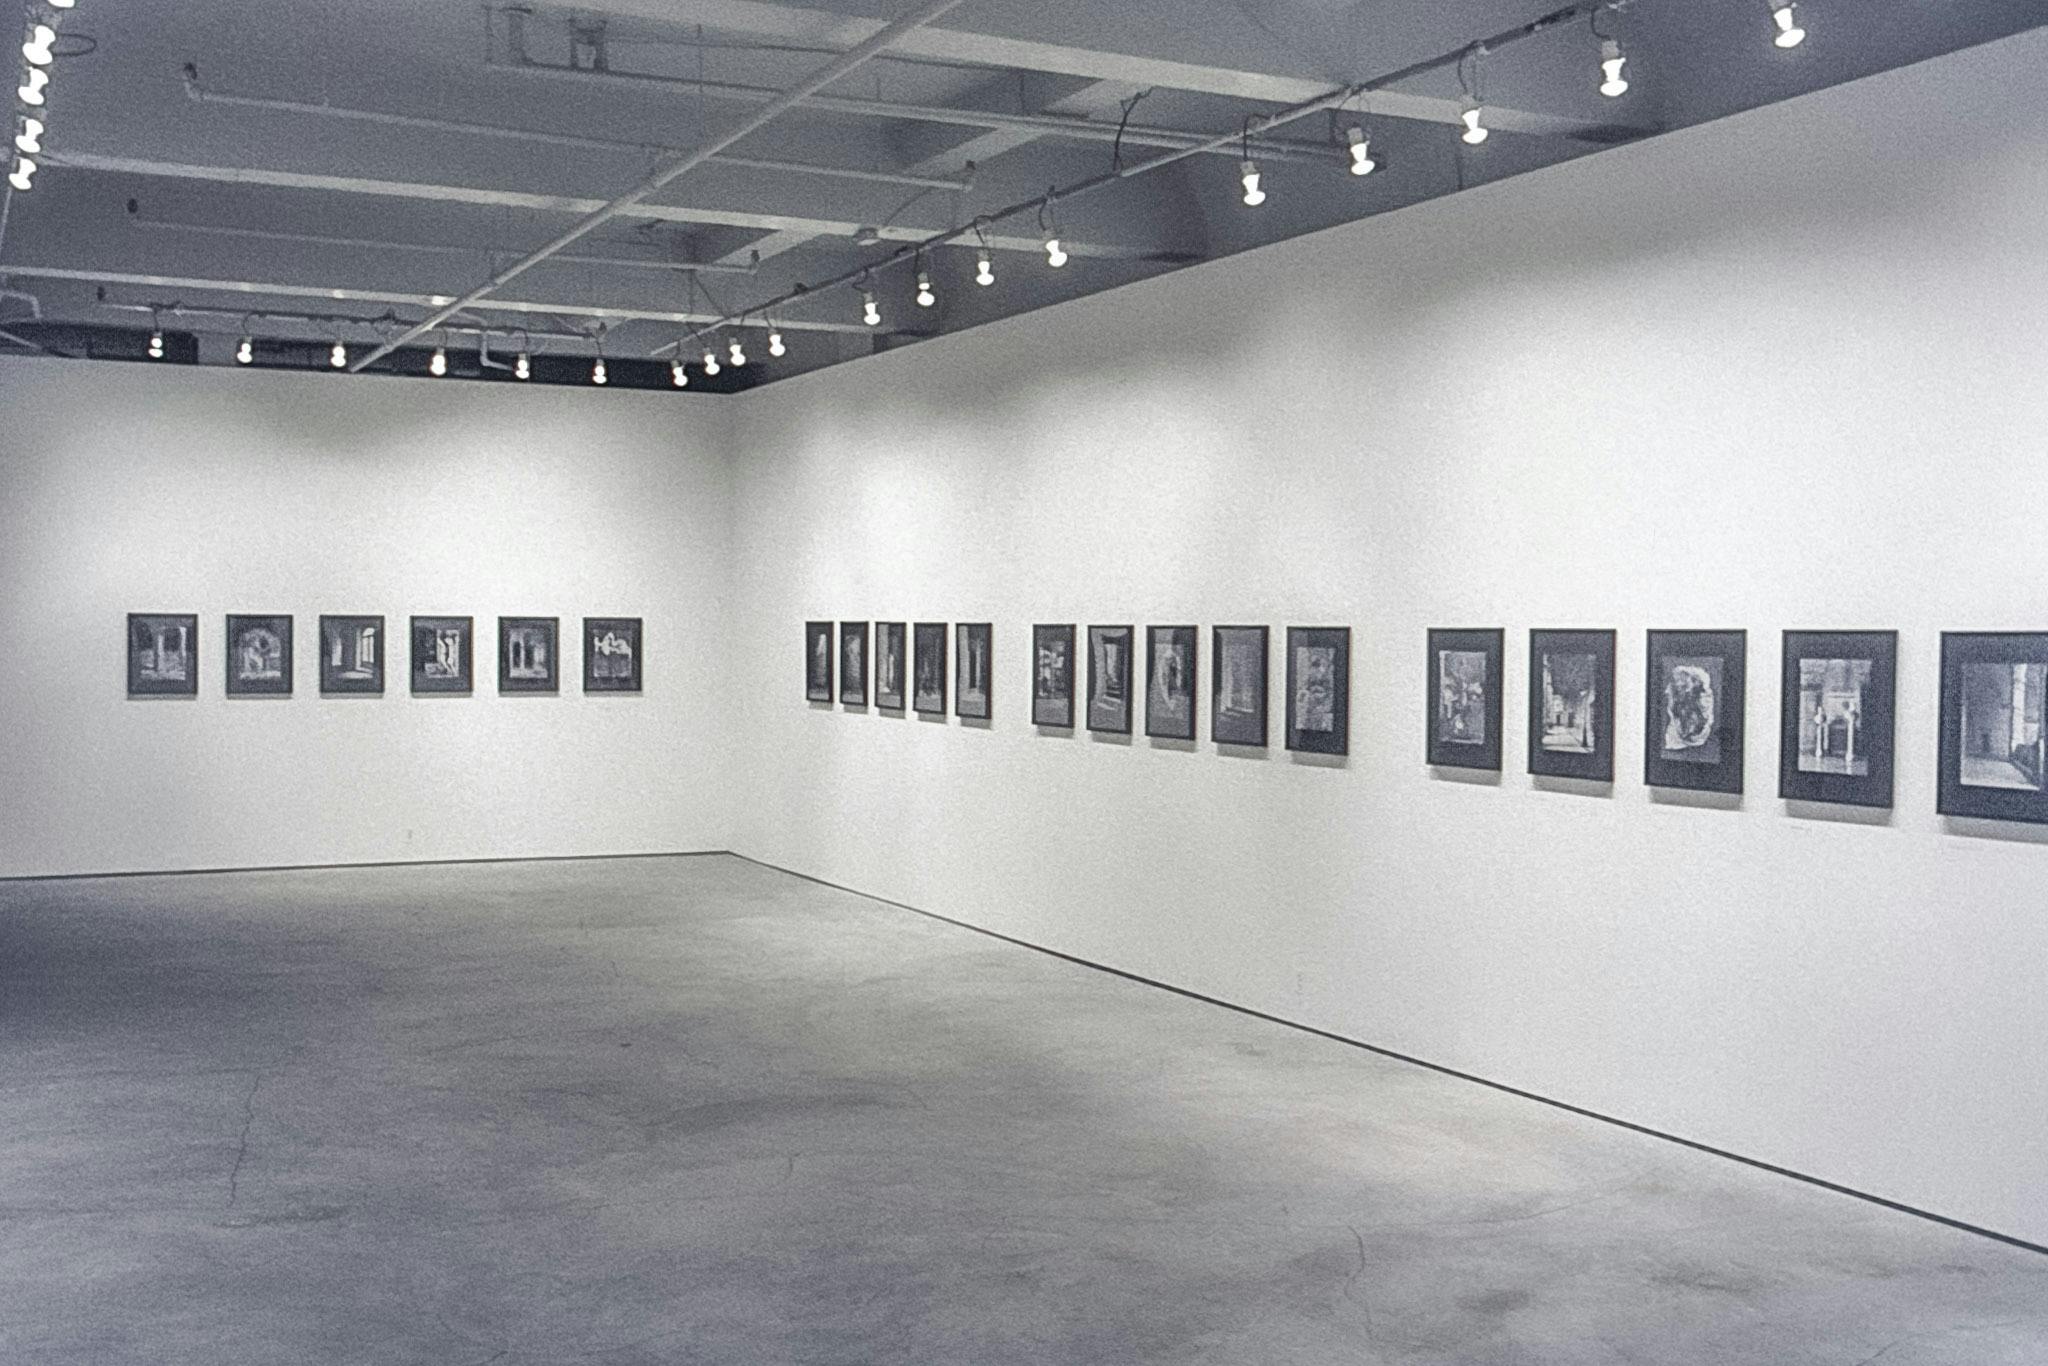 Several photos mounted across two walls of a gallery. The photos are black and white, mounted on black matte board in black frames, and show various architectural spaces, like stairways and arches.